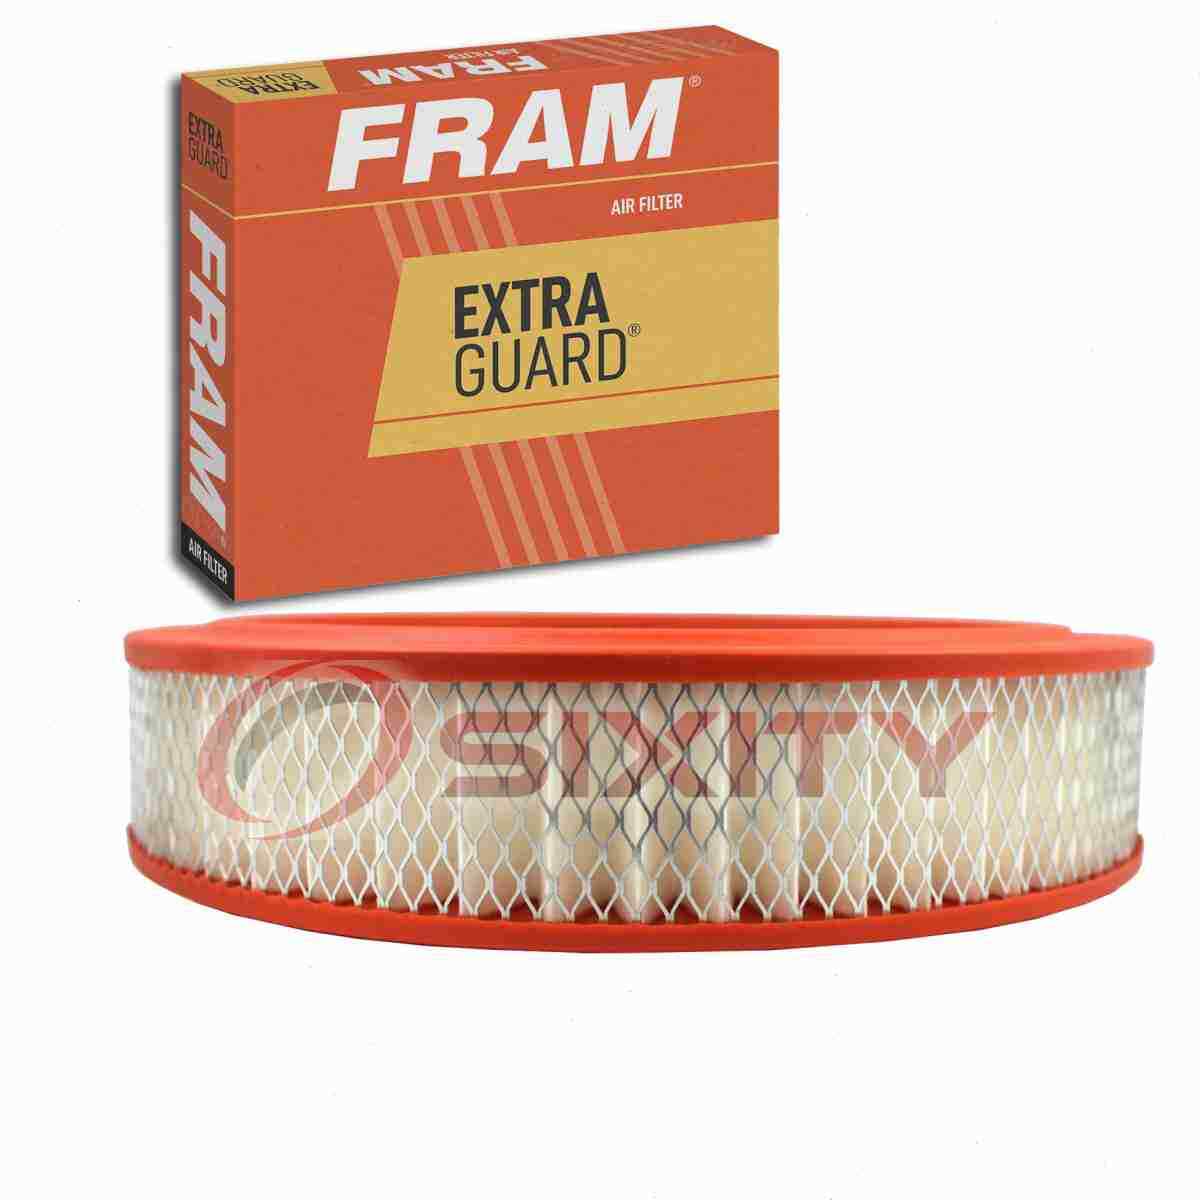 FRAM Extra Guard Air Filter for 1984-1985 Lincoln Mark VII Intake Inlet eu